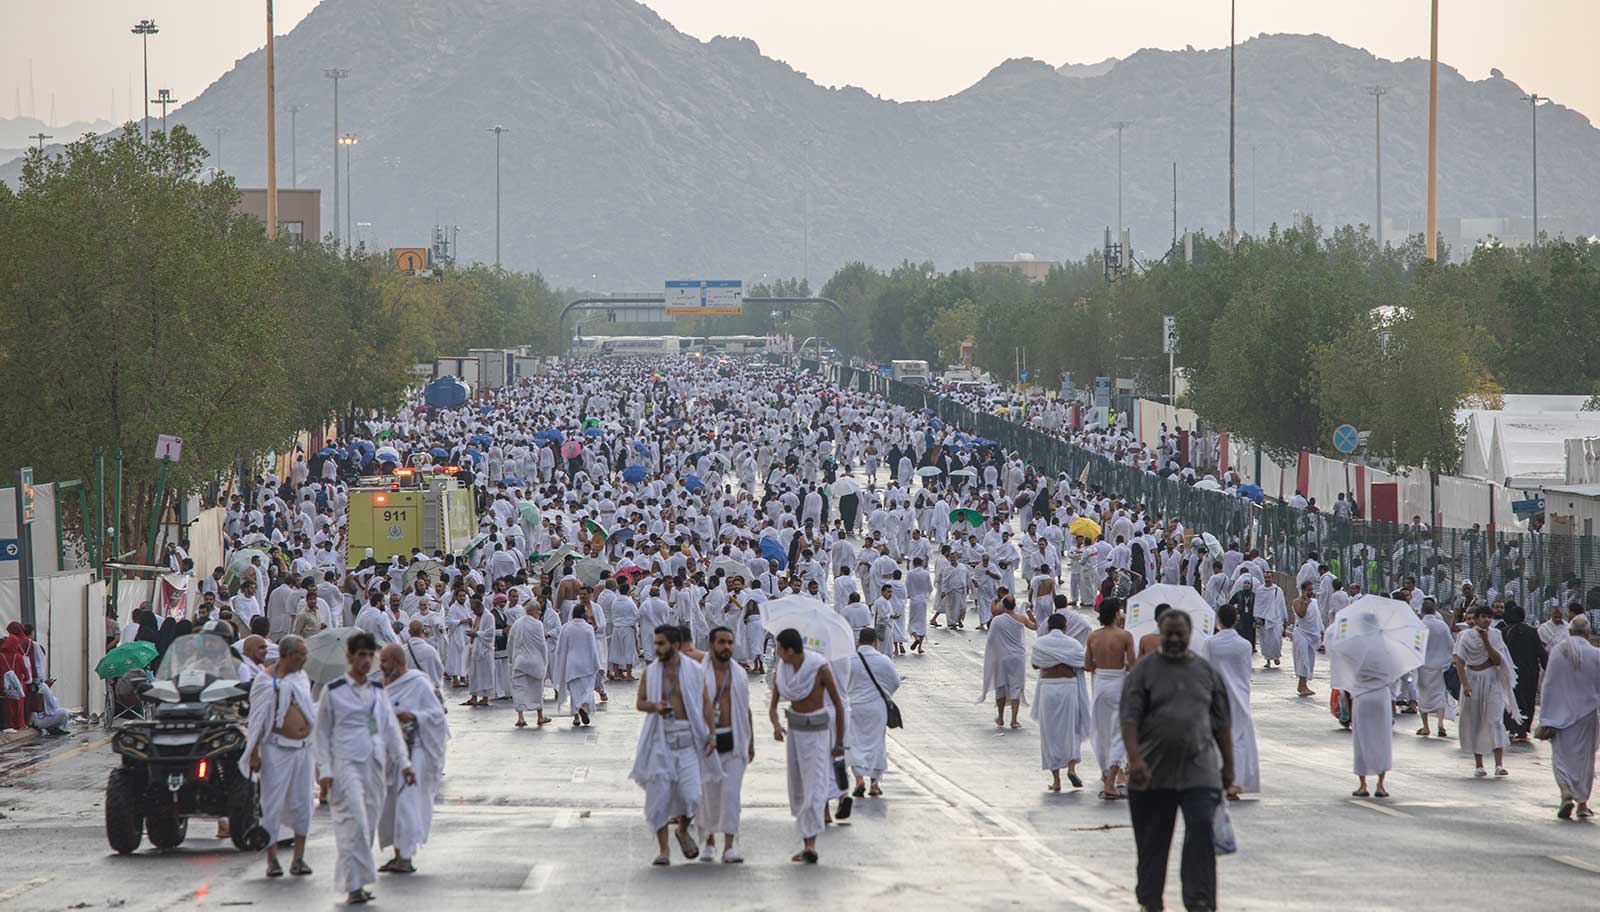 Pilgrims during the Hajj pilgrimage, a profound spiritual journey and one of the largest gatherings in the world, in Makkah, Saudi Arabia. (Source: Shutterstock)